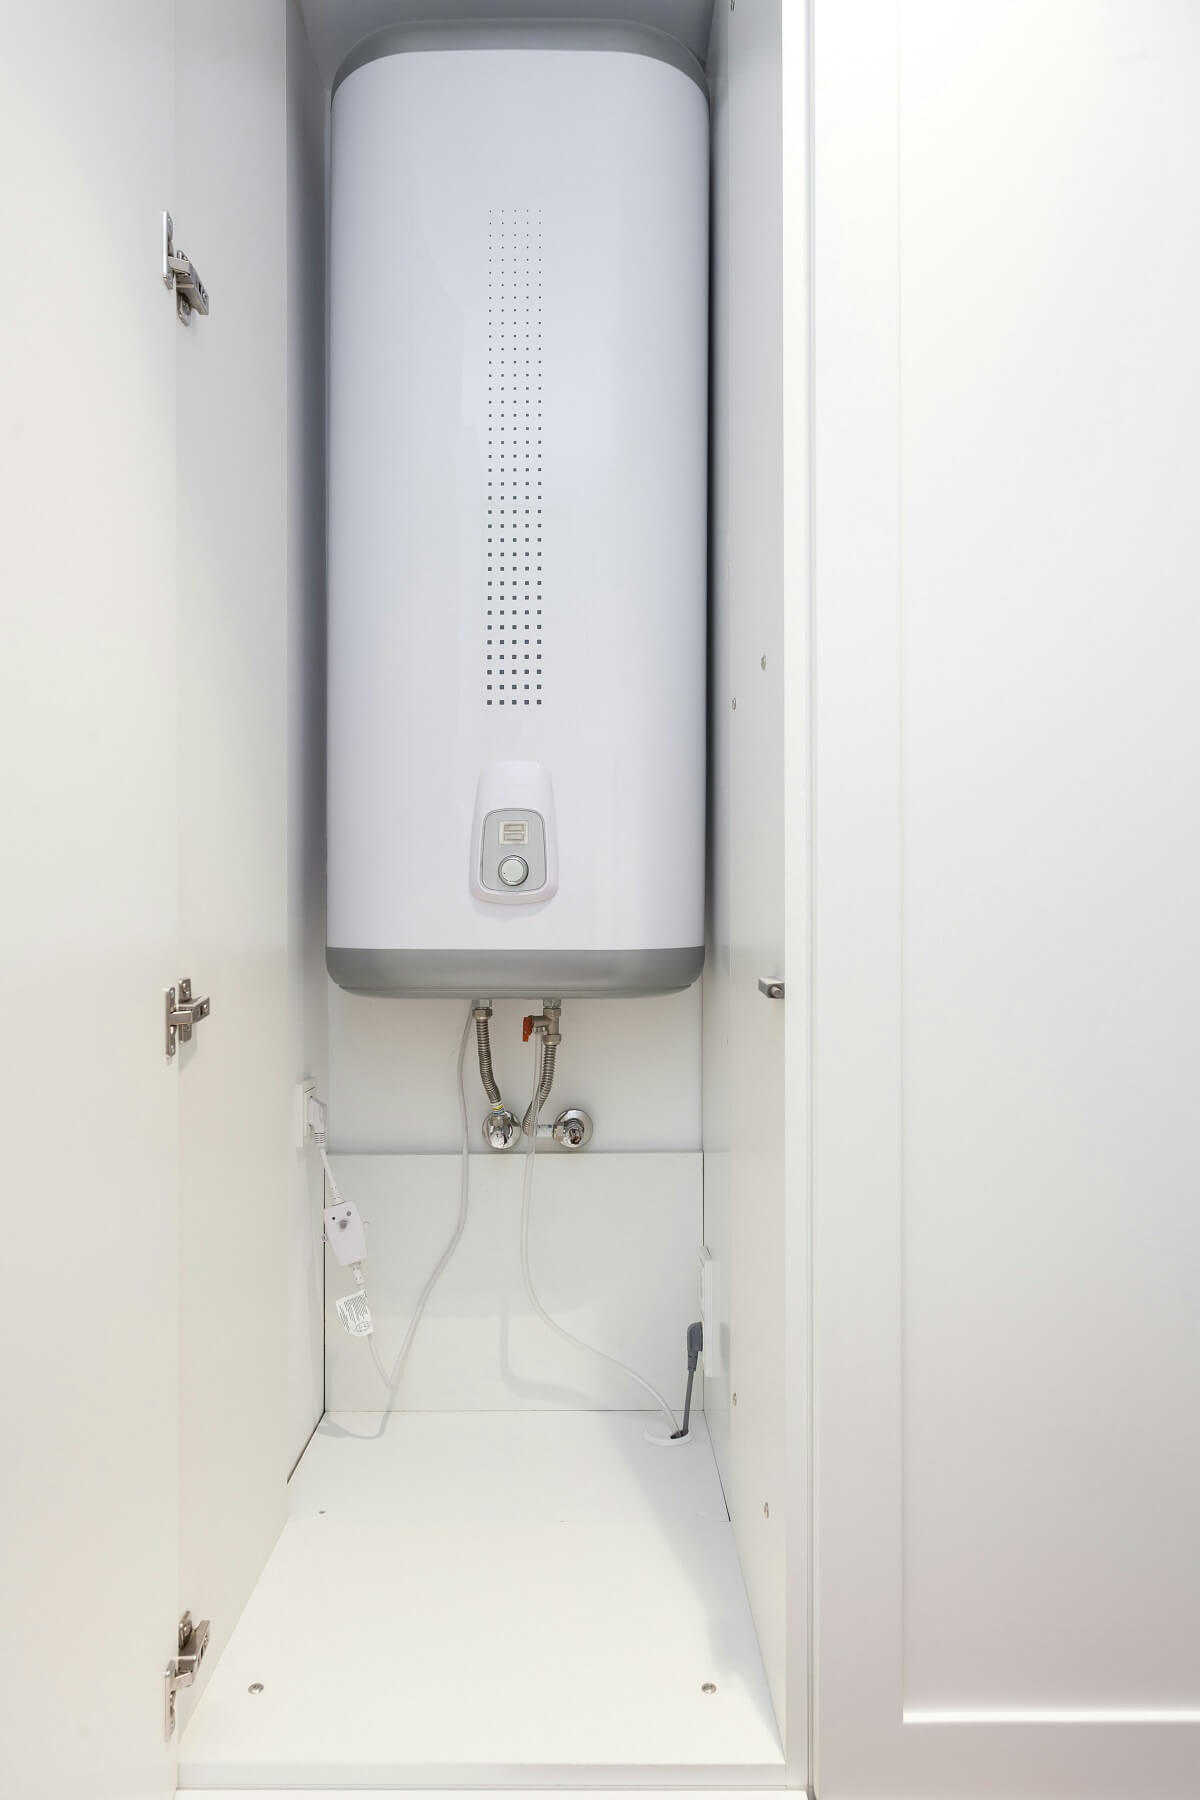 5 Water Heater Issues That Demand a Professional Plumber - Ehret Plumbing & Heating